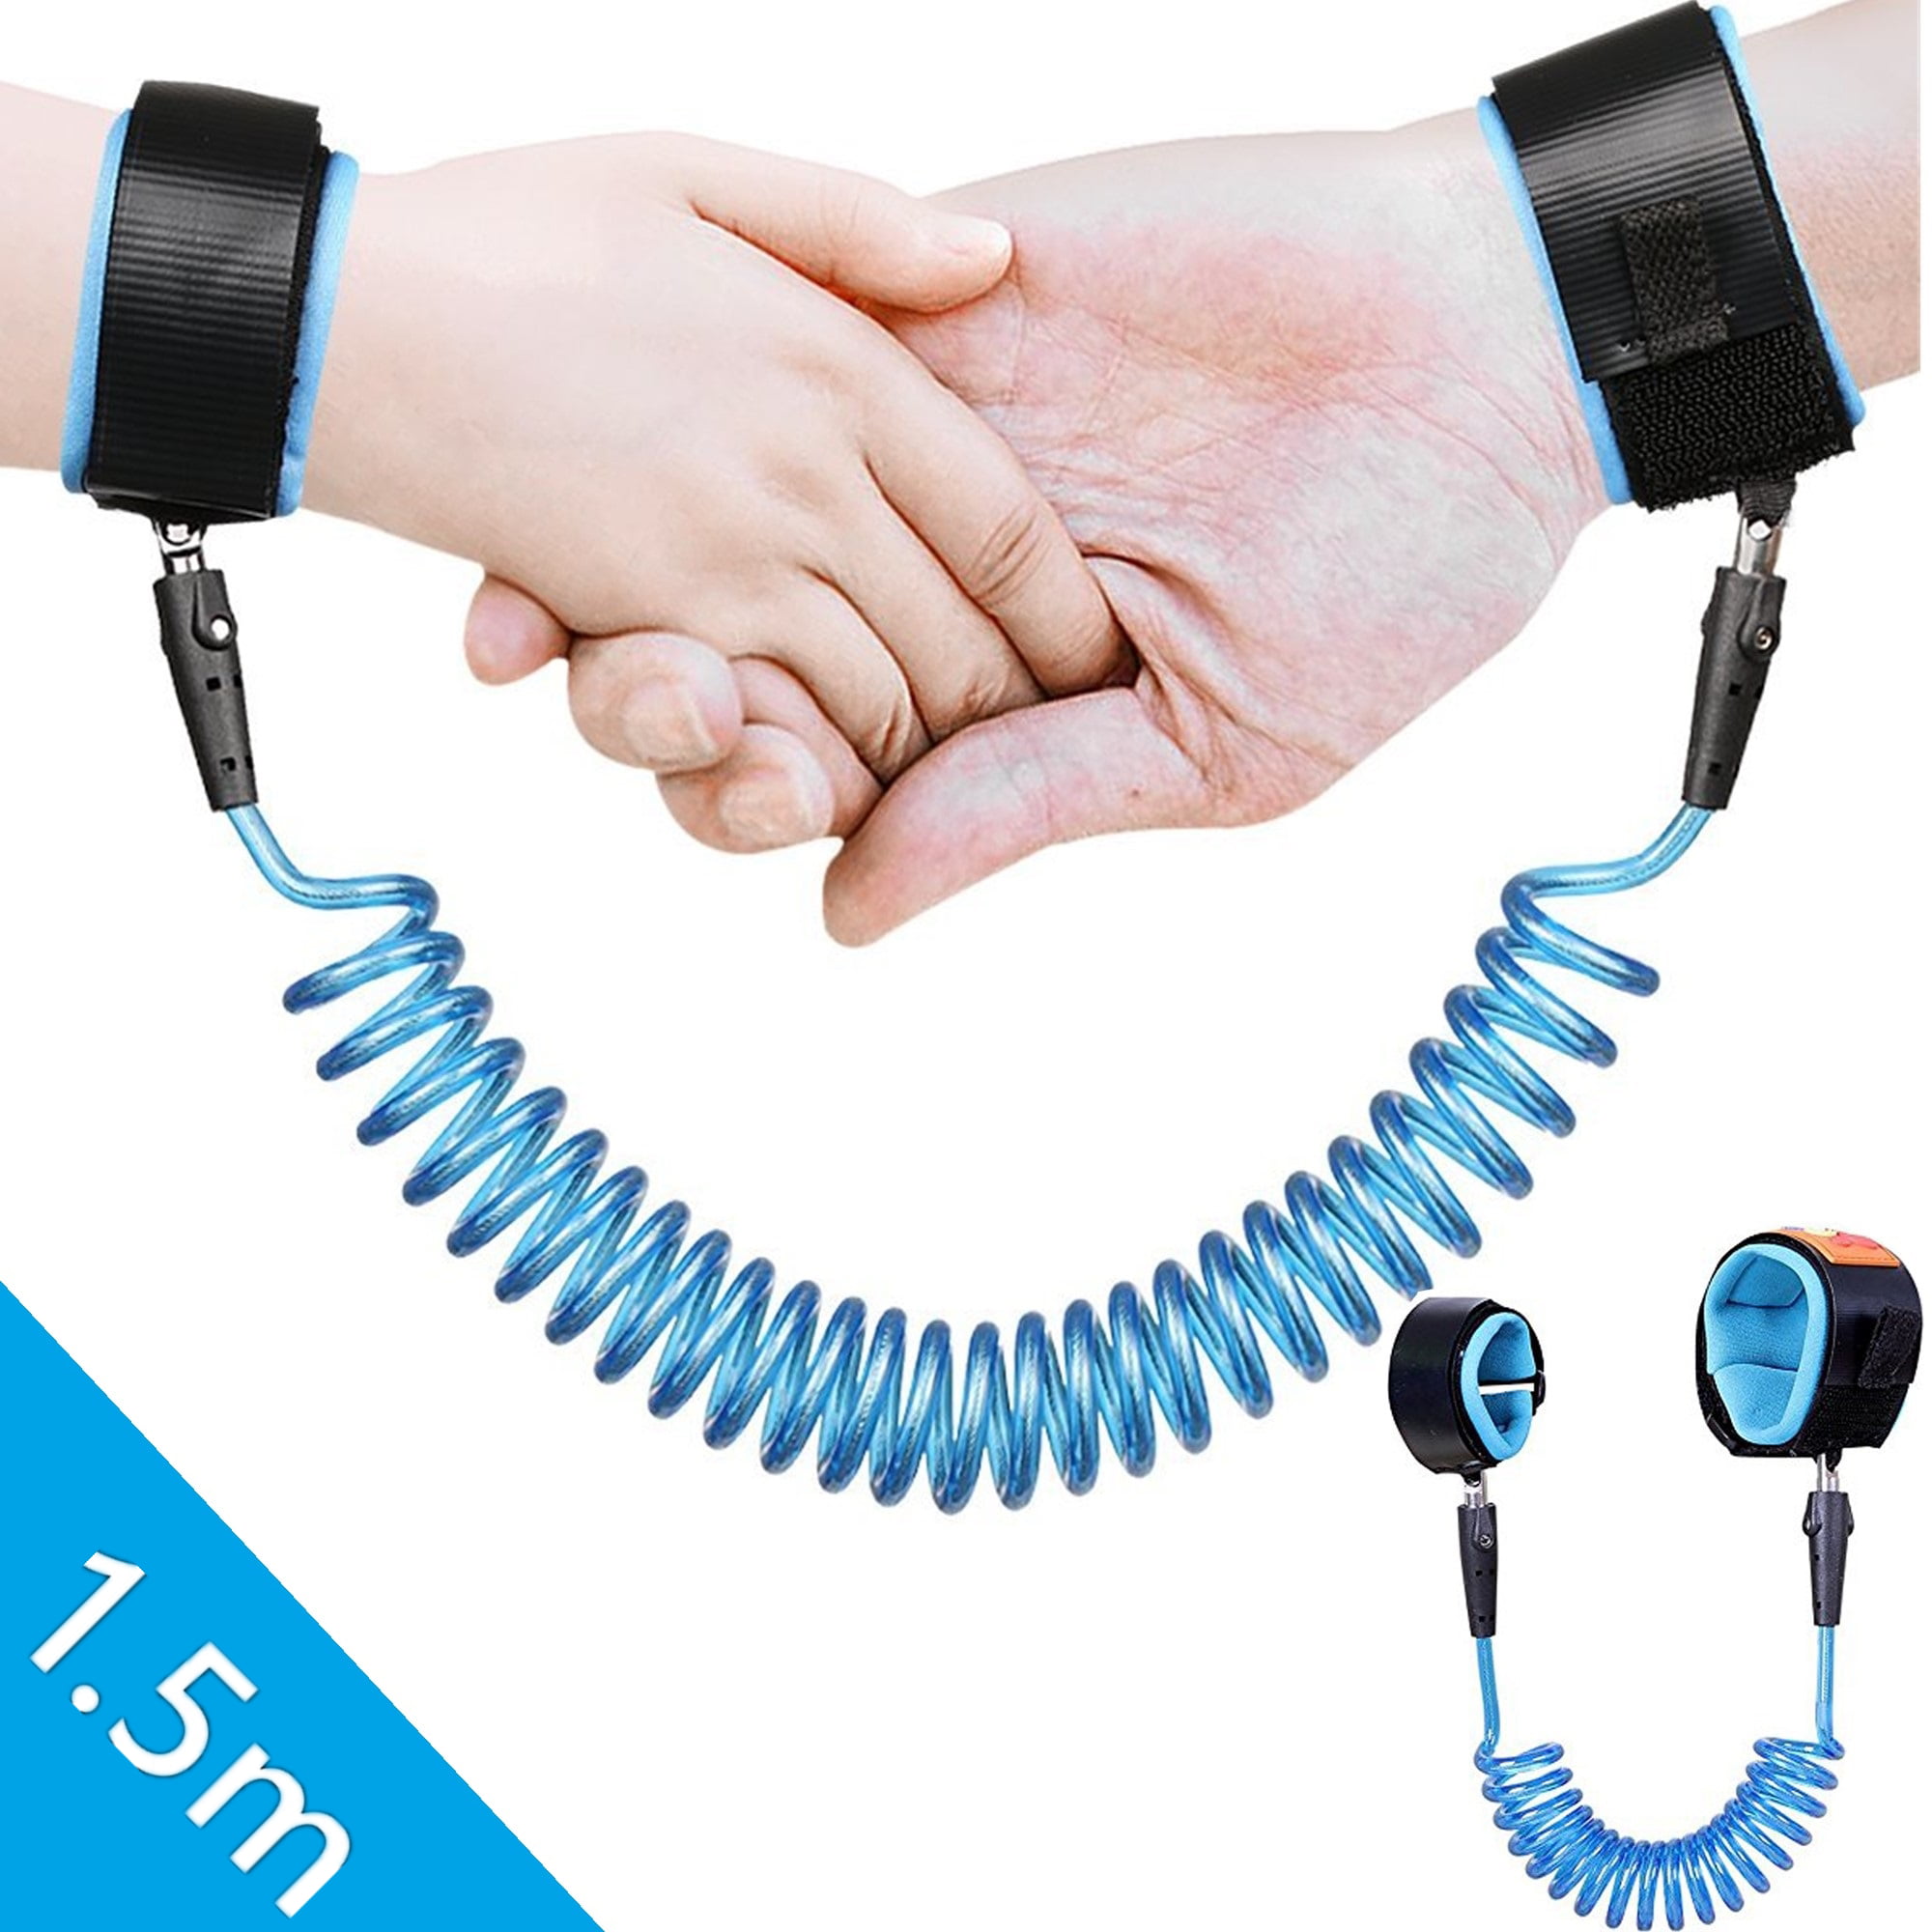 Wrist Link Hand Strap Leash Toddler Kids Baby Anti-lost Safety Walking Harness 